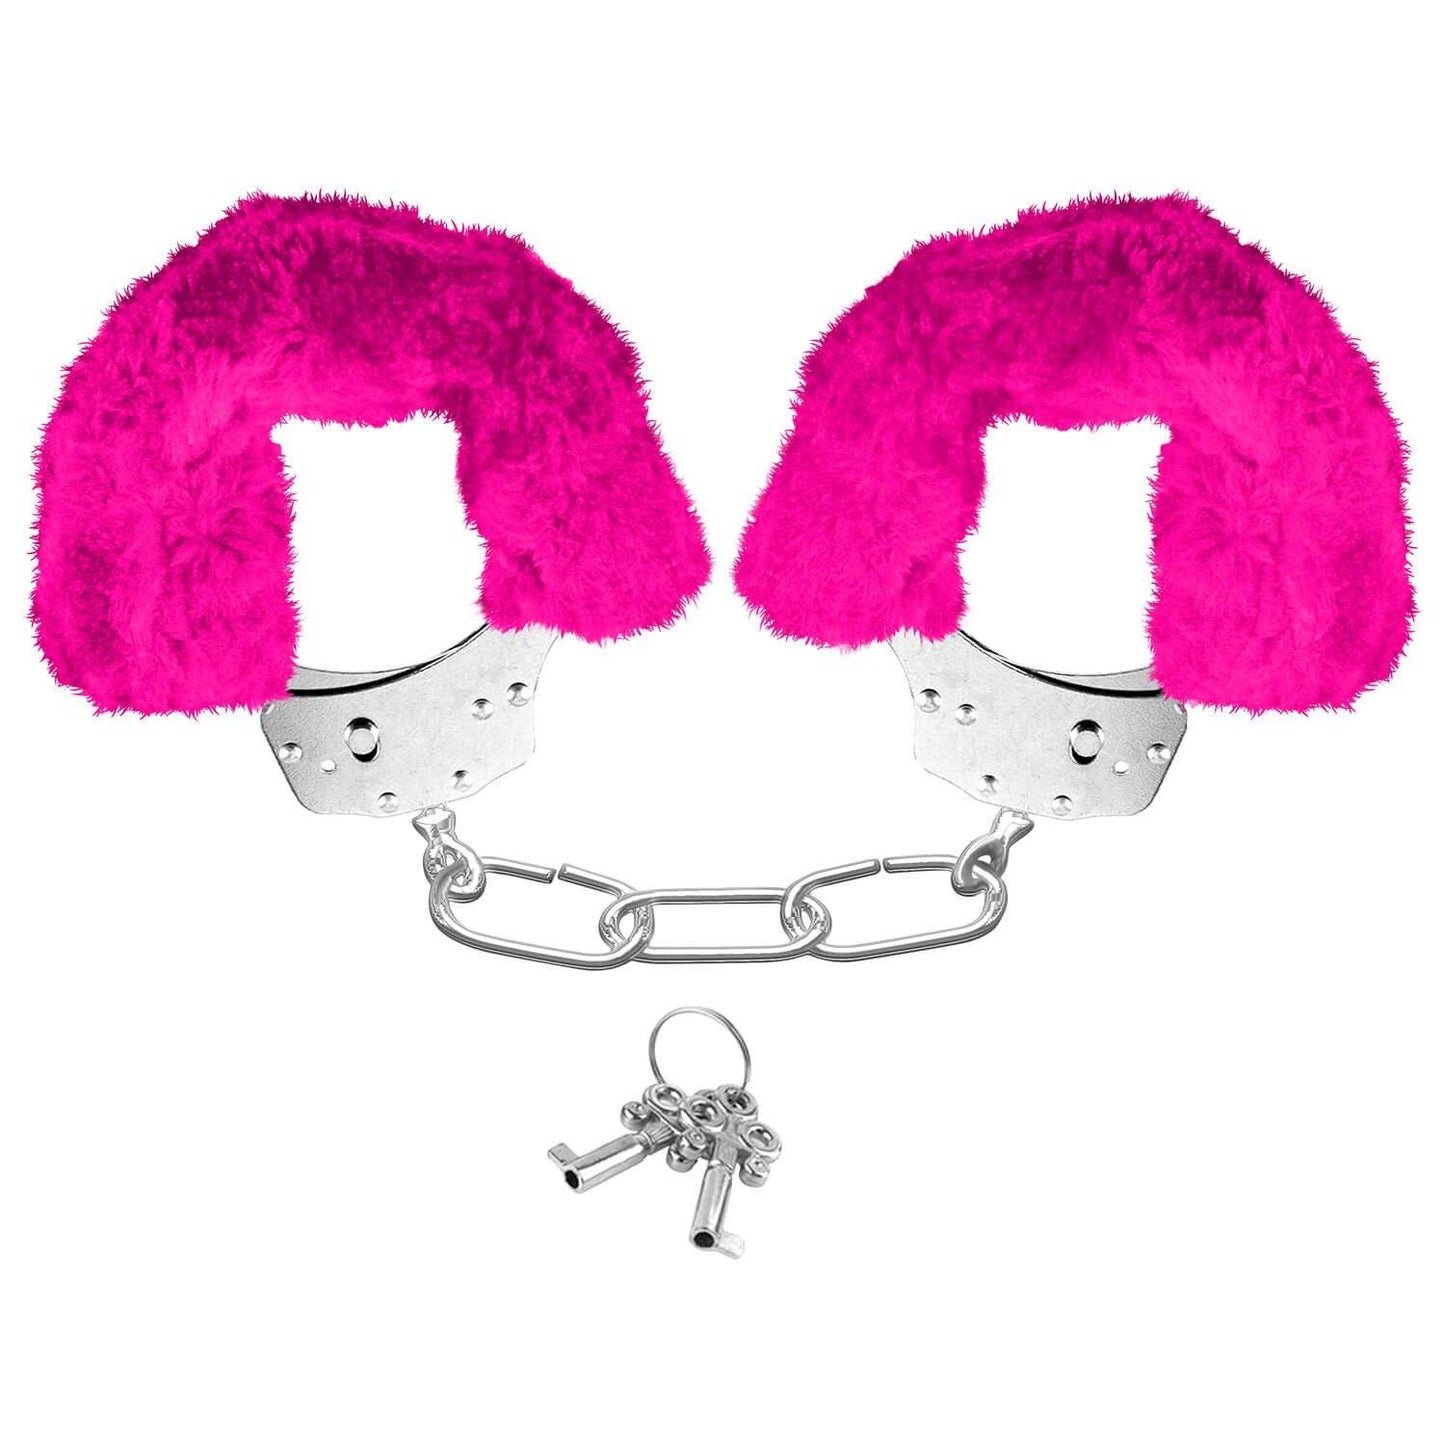 Neon Furry Cuffs - Lock Up Your Lover!